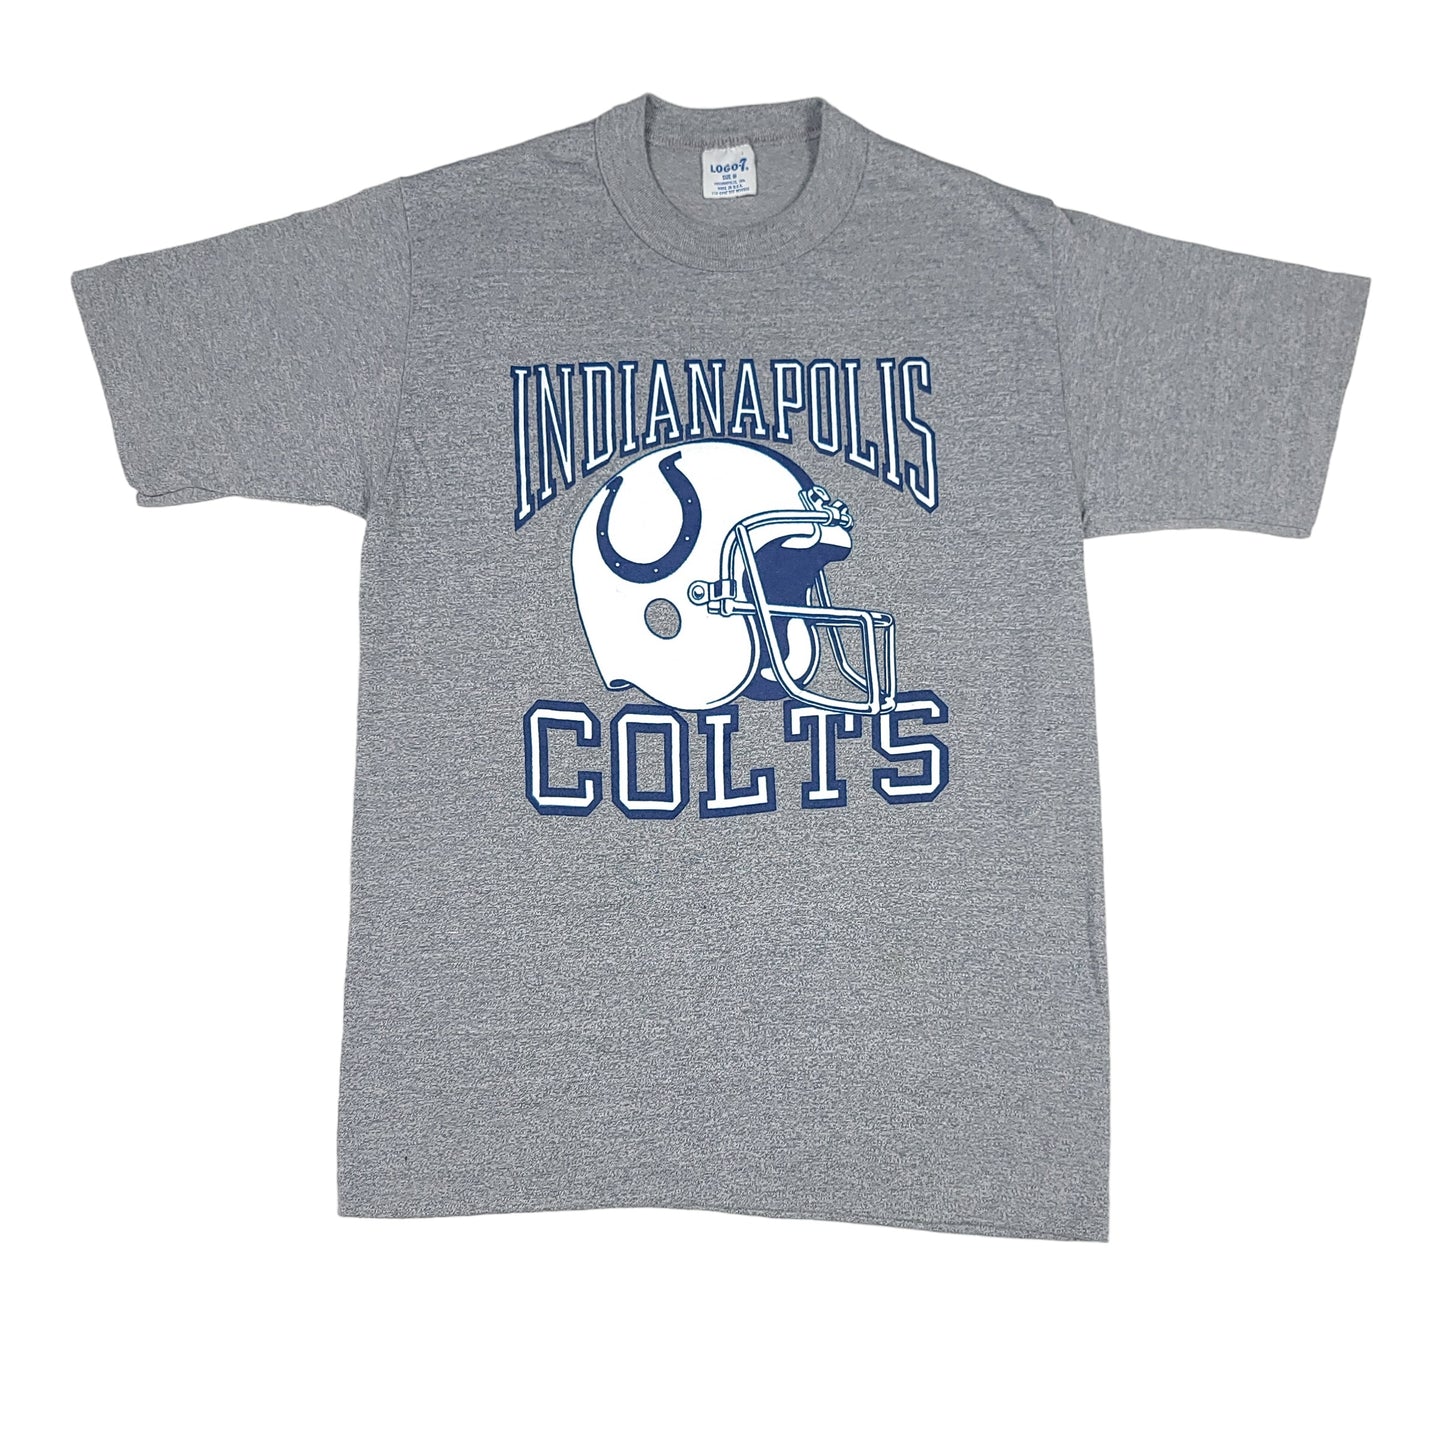 Vintage Indianapolis Colts NFL Gray Logo 7 Tee